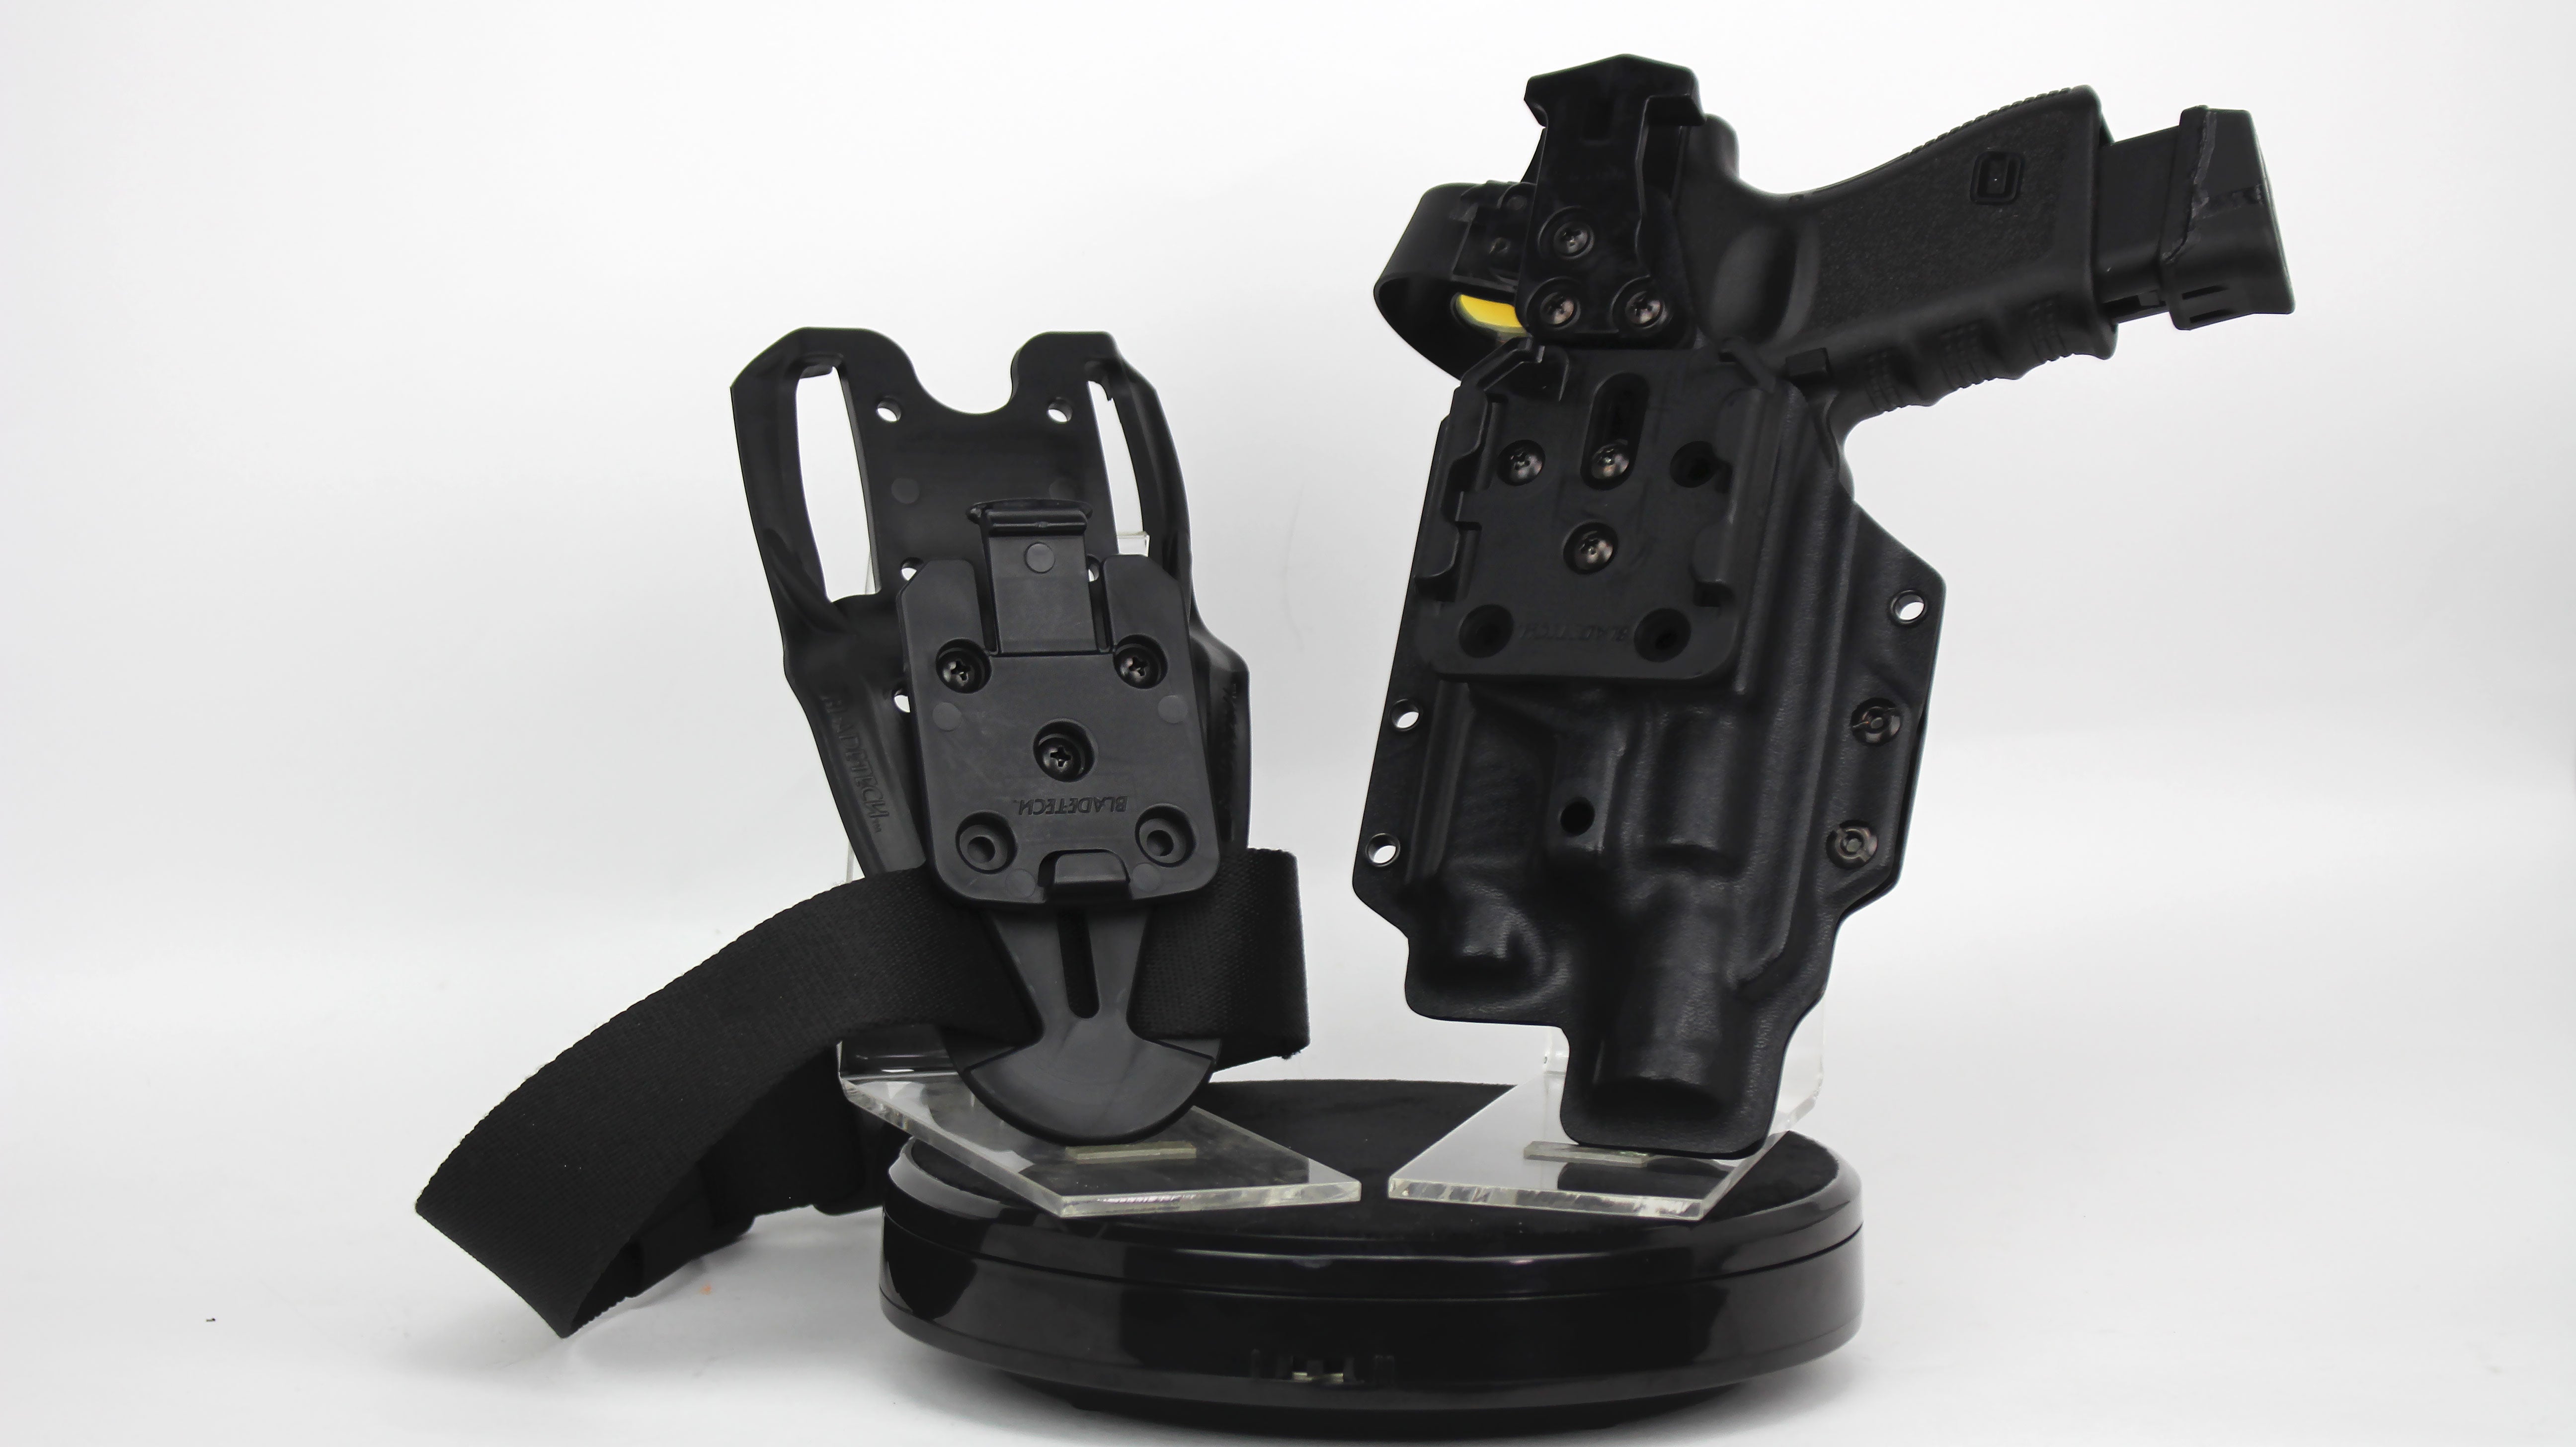 PAX lock systeme is a universal belt holder for all PAX Pro Series holsters